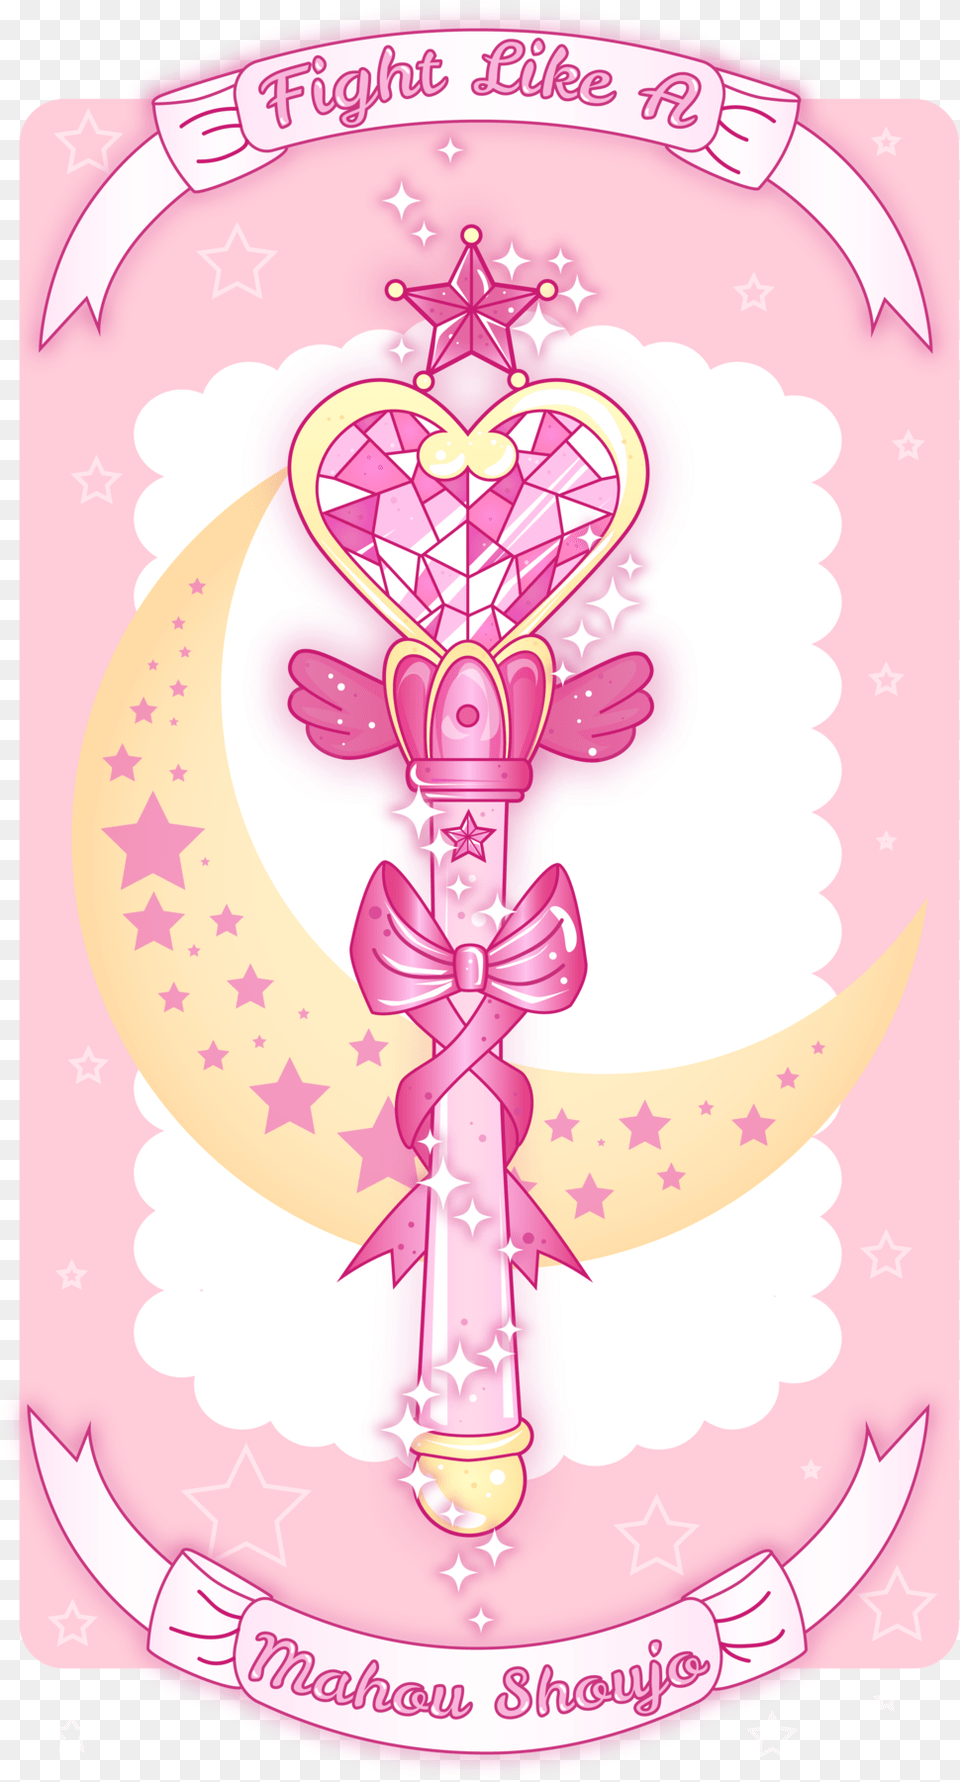 Made Another Fight Like A Mahou Shoujo Sailor Moon Wand Png